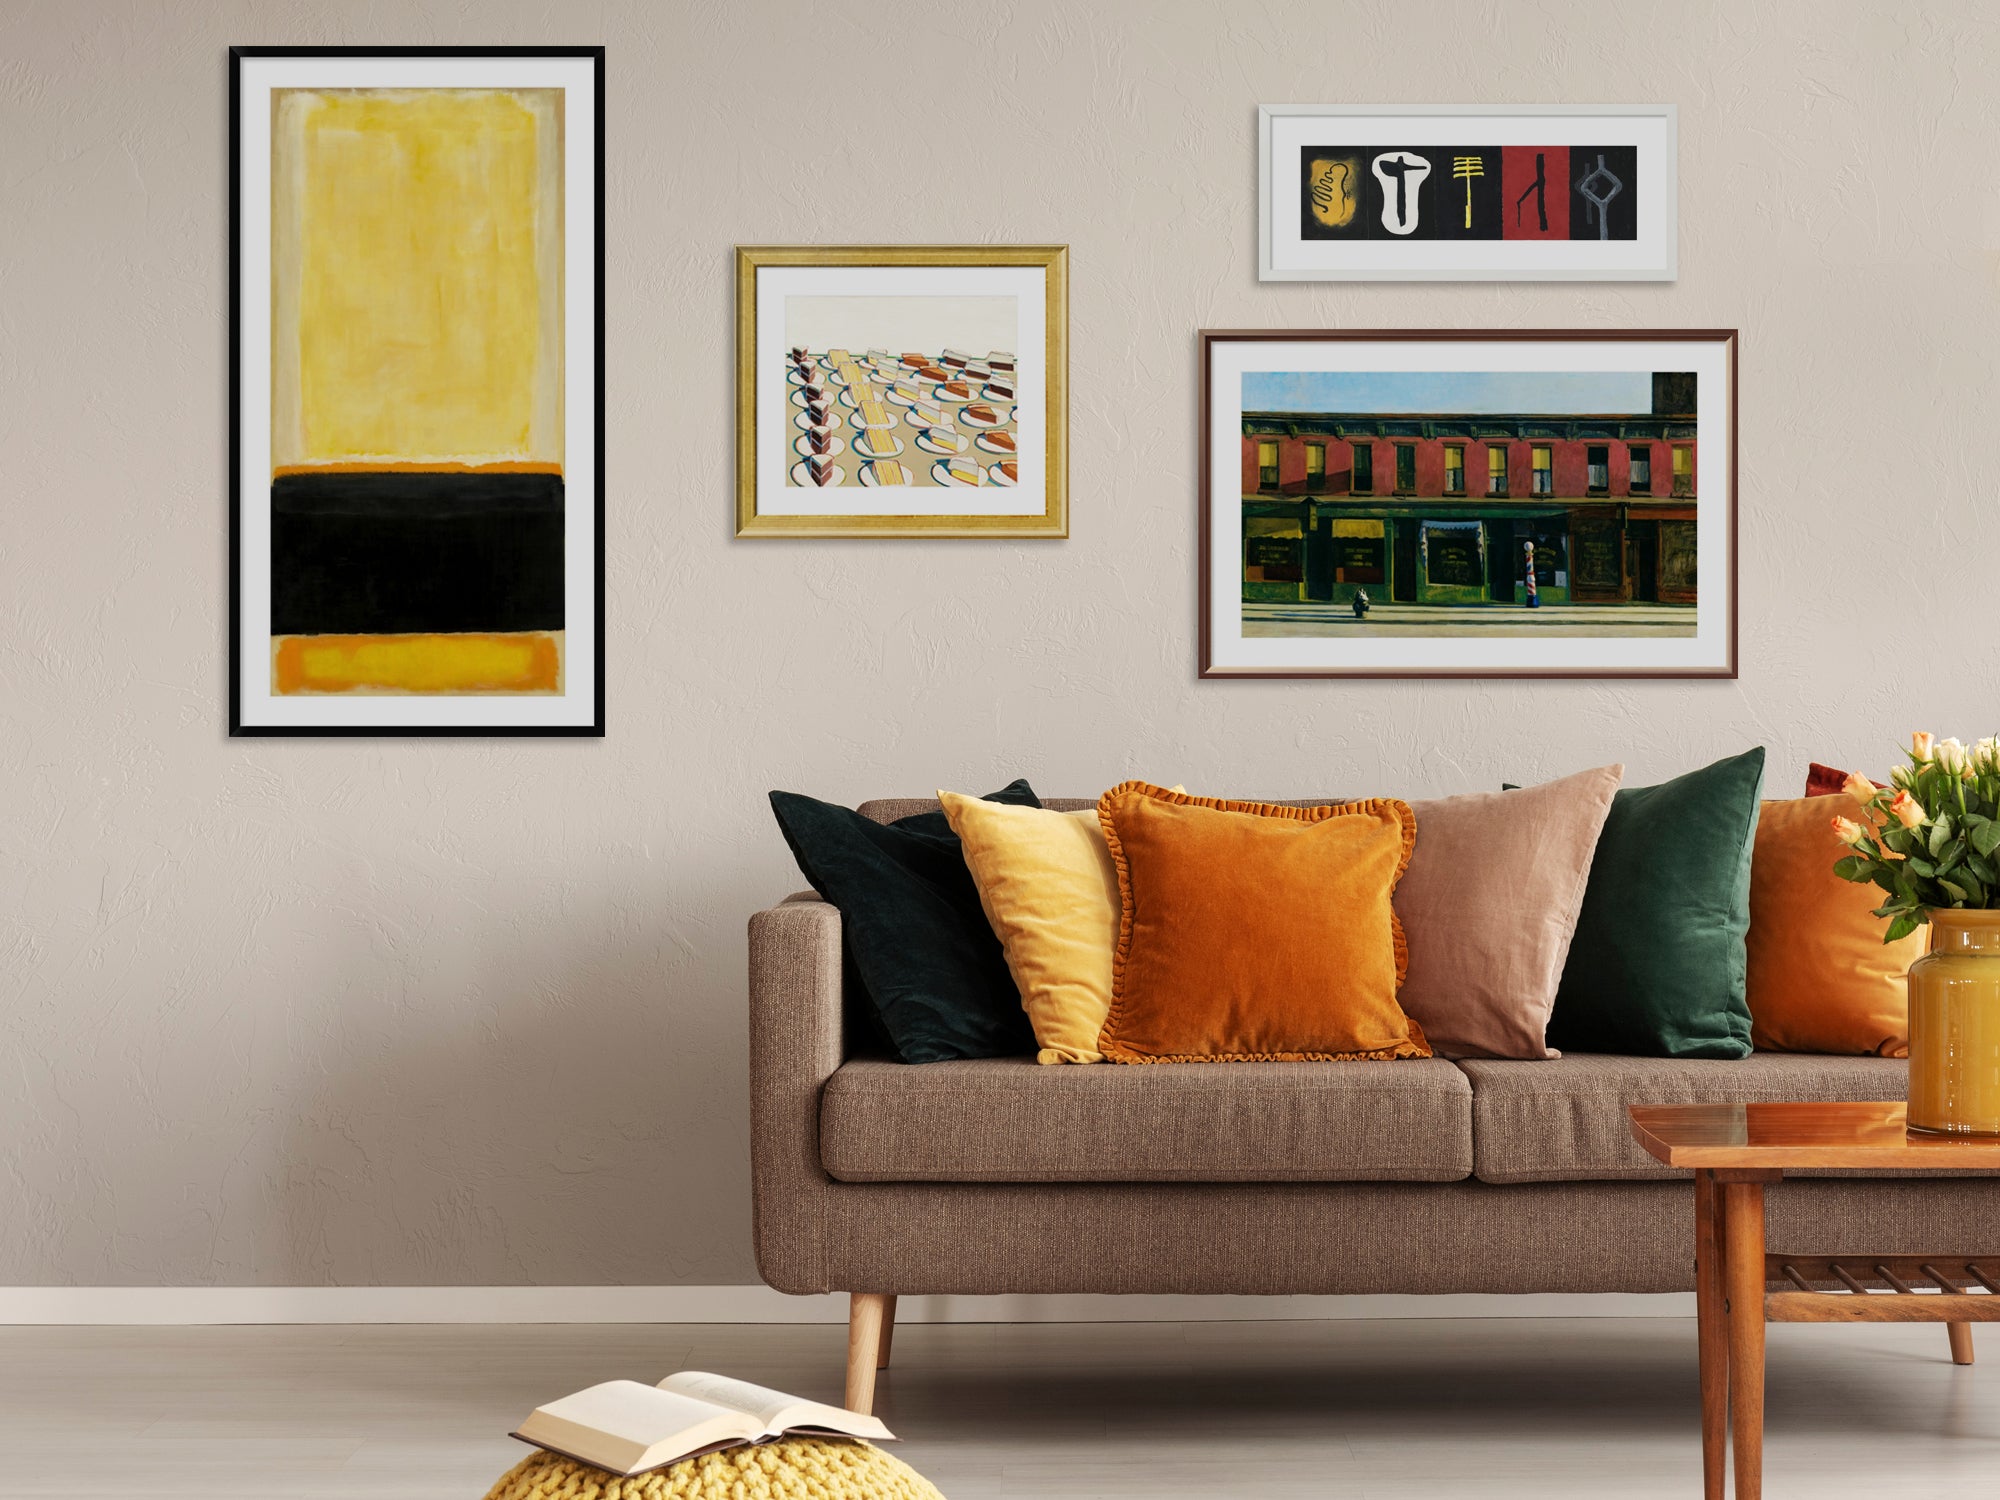 A living room space with framed custom prints hanging on wall